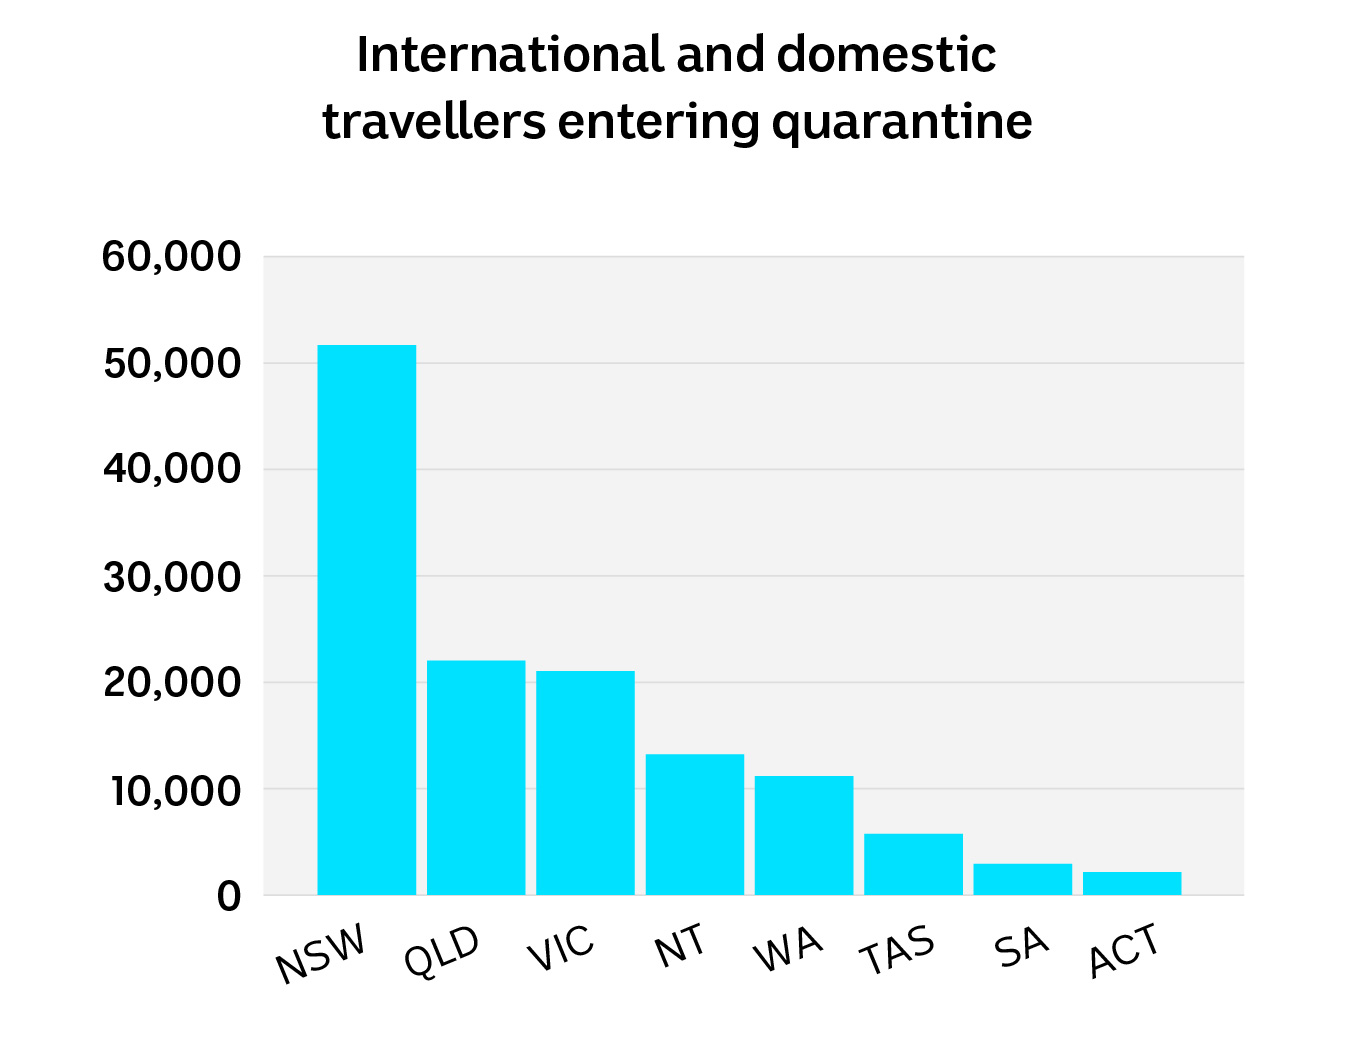 A graph showing from most to least the states who have quarantined the most domestic and international travellers.